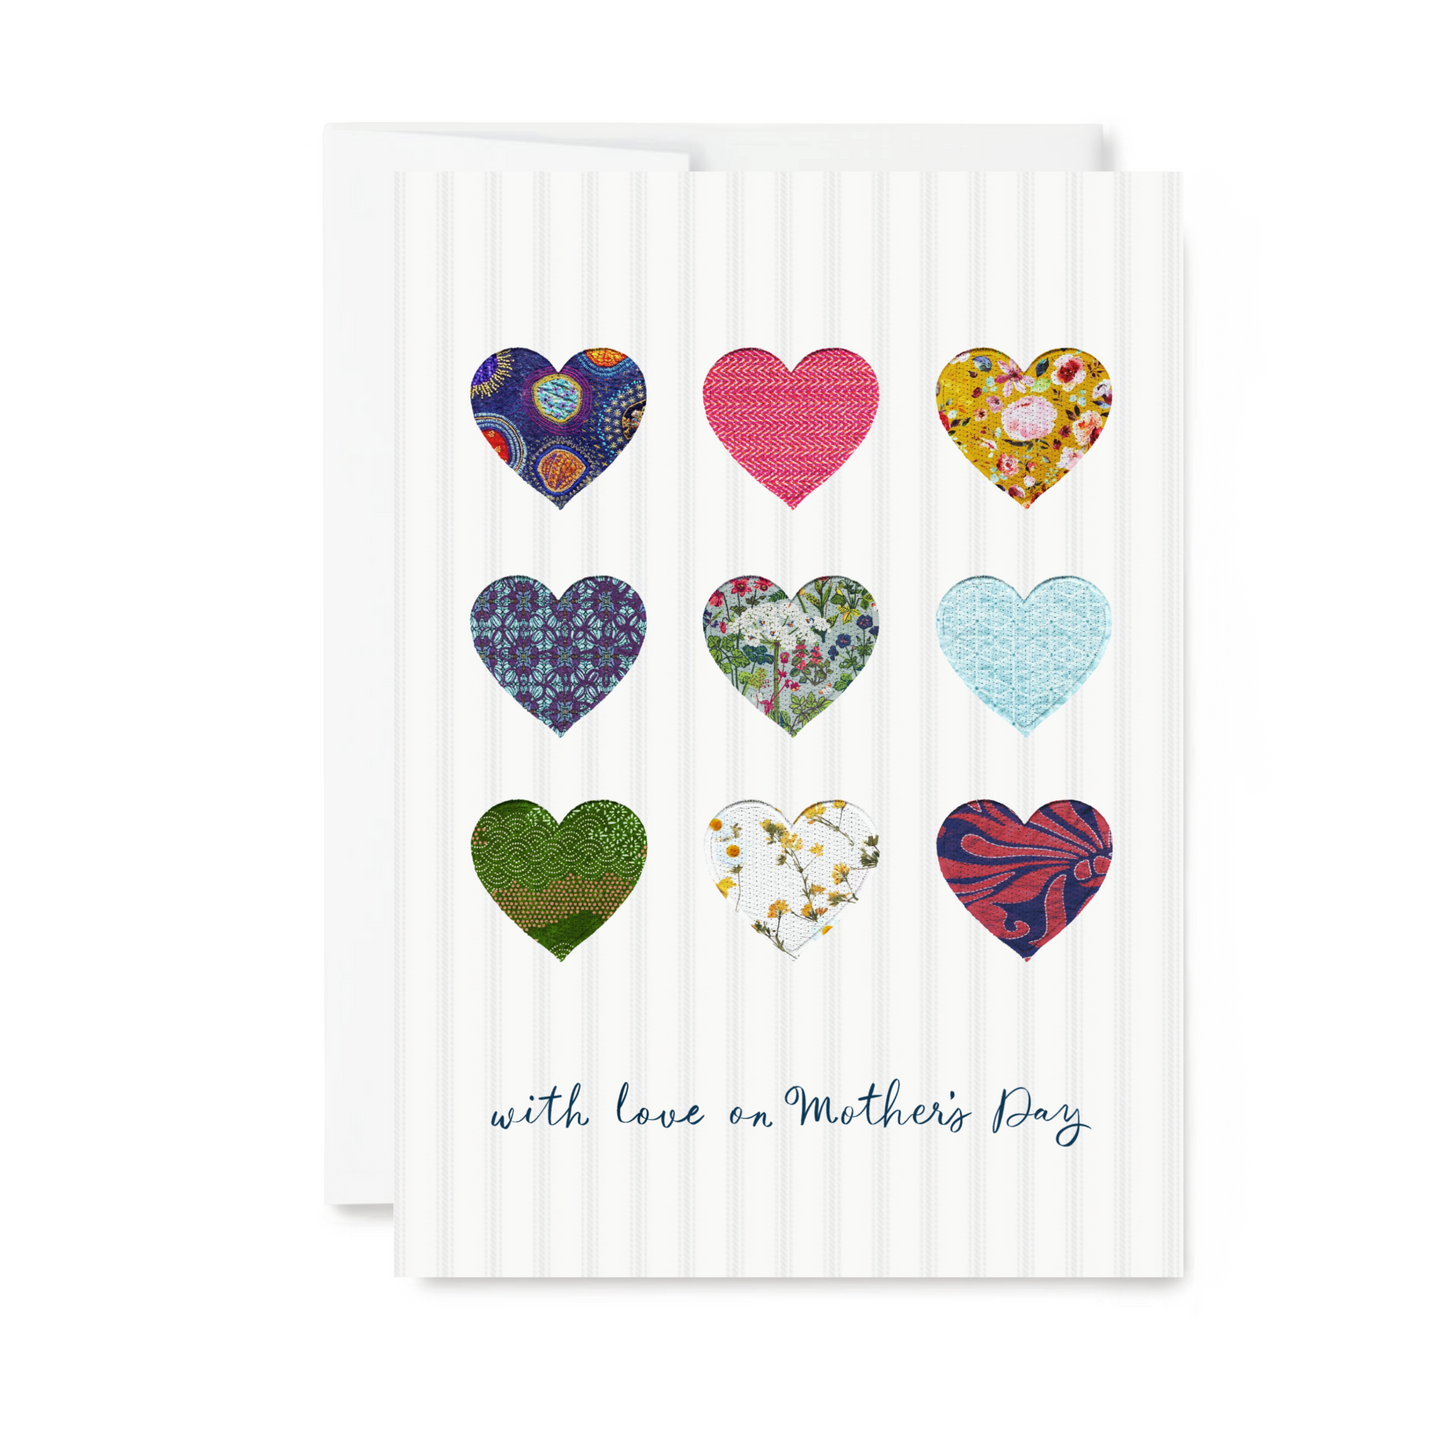 With Love On Mother's Day Card